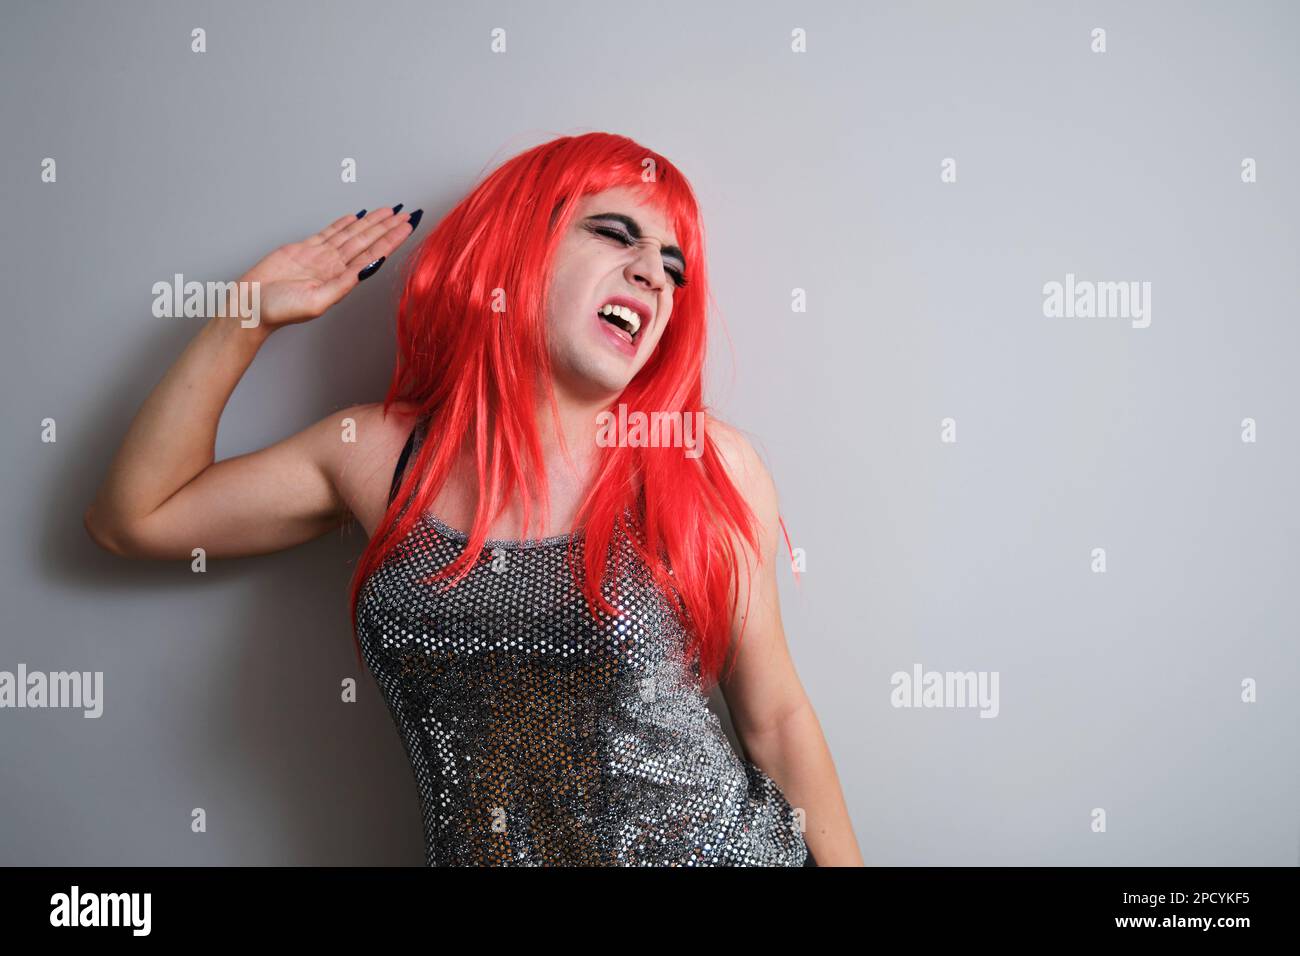 Portrait of gender fluid male screaming and wearing a red wig. Stock Photo